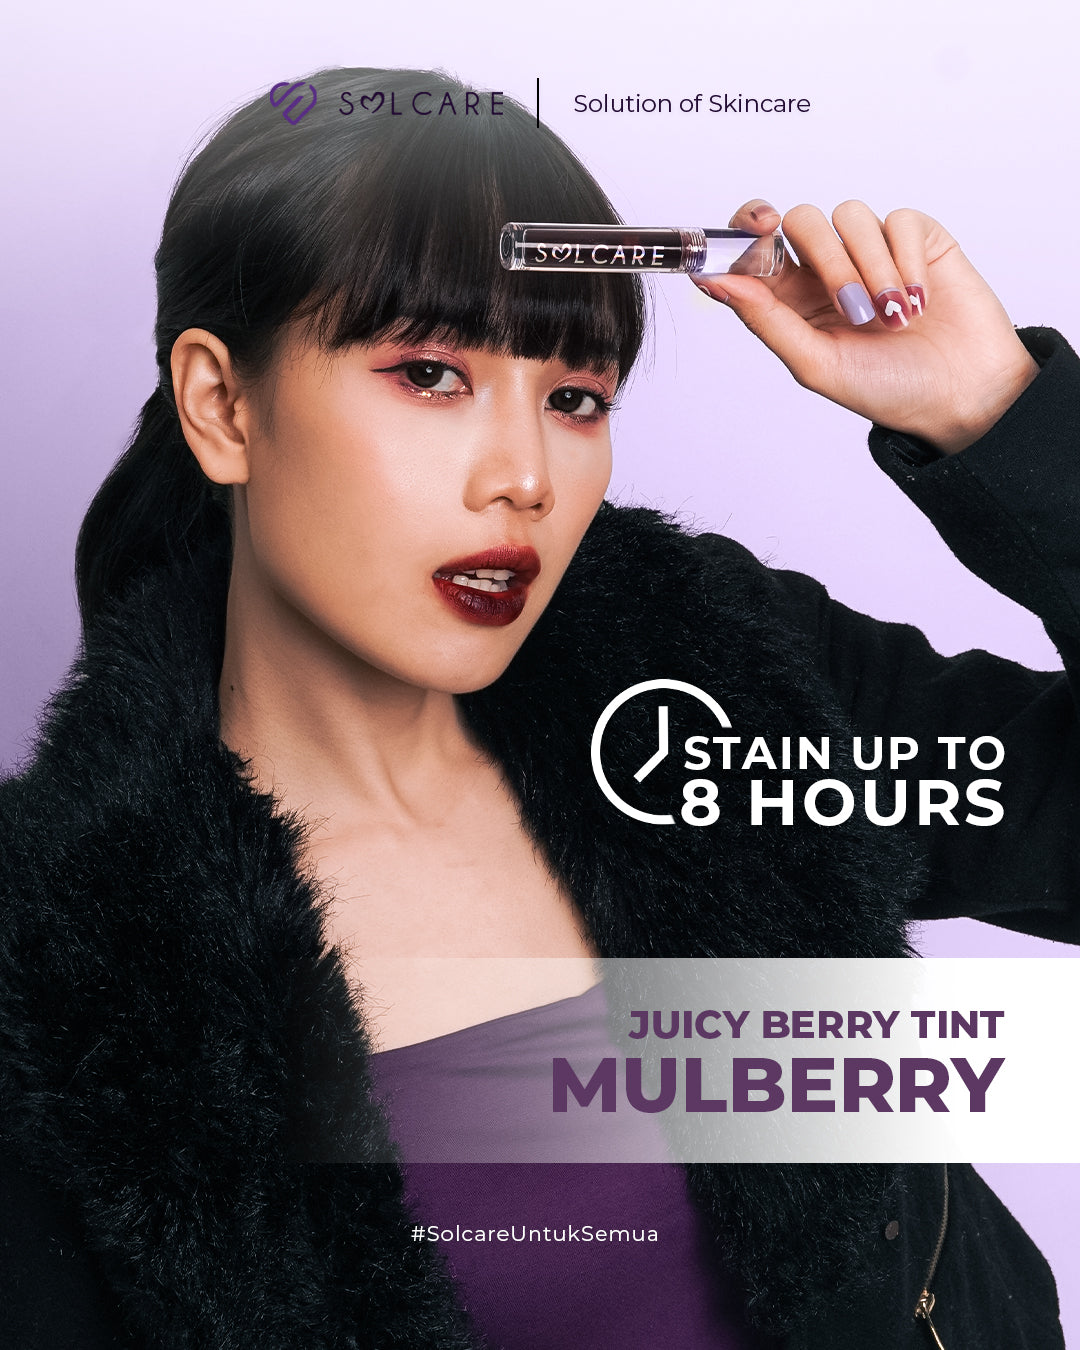 Juicy Berry Tint Mulberry